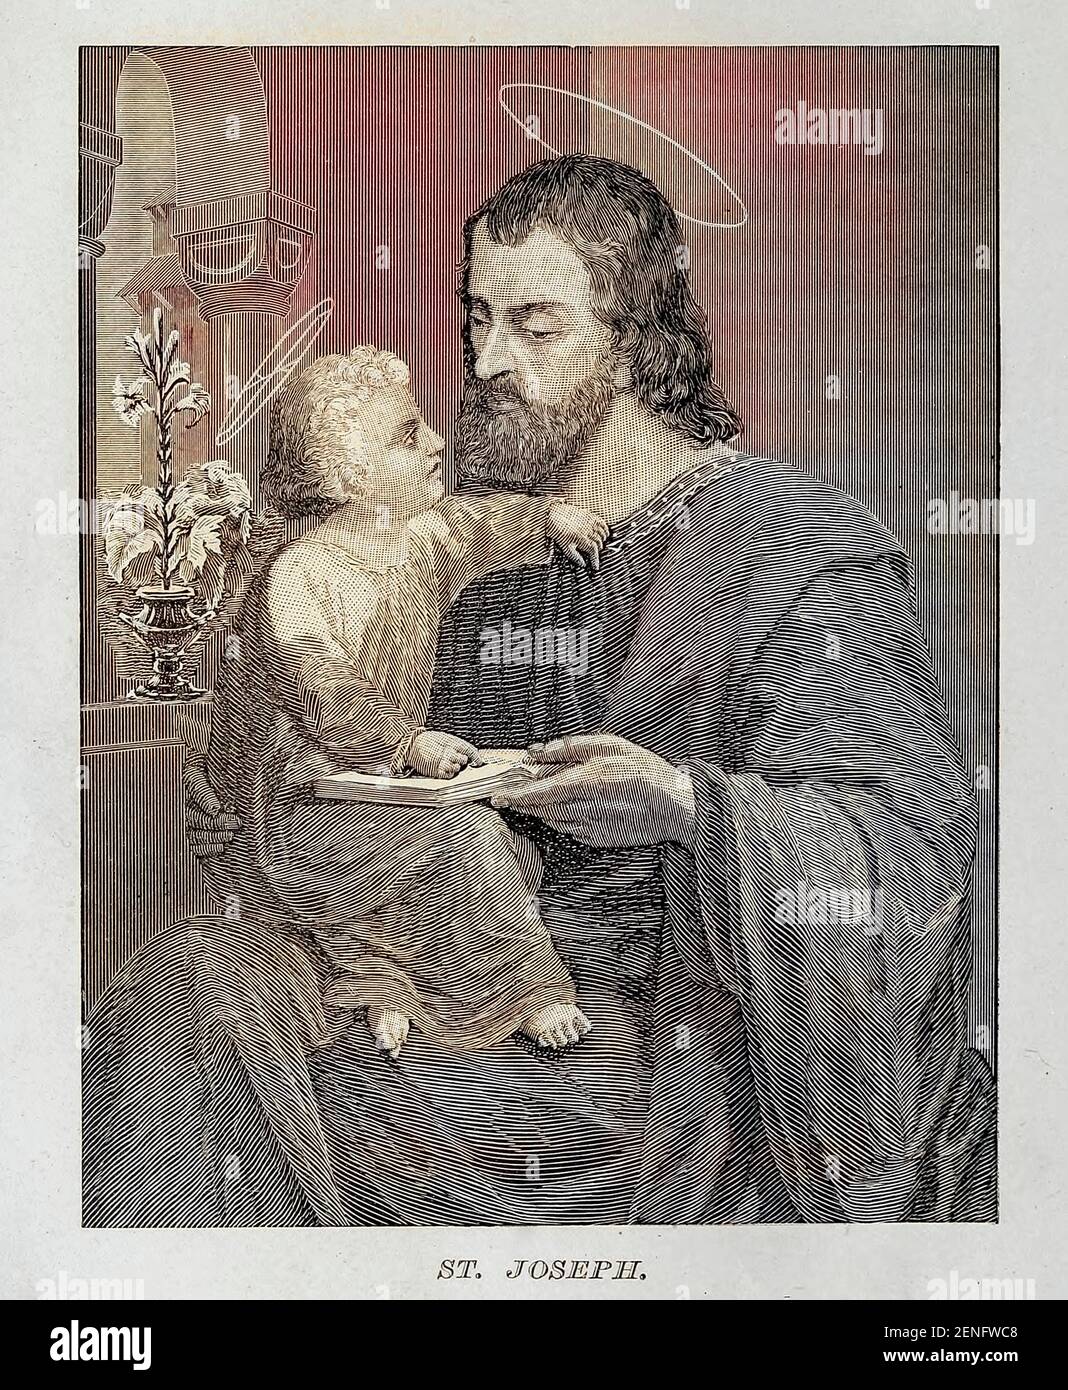 Saint Joseph From ' The pictorial Catholic library ' containing seven volumes in one: History of the Blessed Virgin -- The dove of the tabernacle -- Catholic history -- Apparition of the Blessed Virgin -- A chronological index -- Pastoral letters of the Third Plenary. Council -- A chaplet of verses -- Catholic hymns  Published in New York by Murphy & McCarthy in 1887 Stock Photo